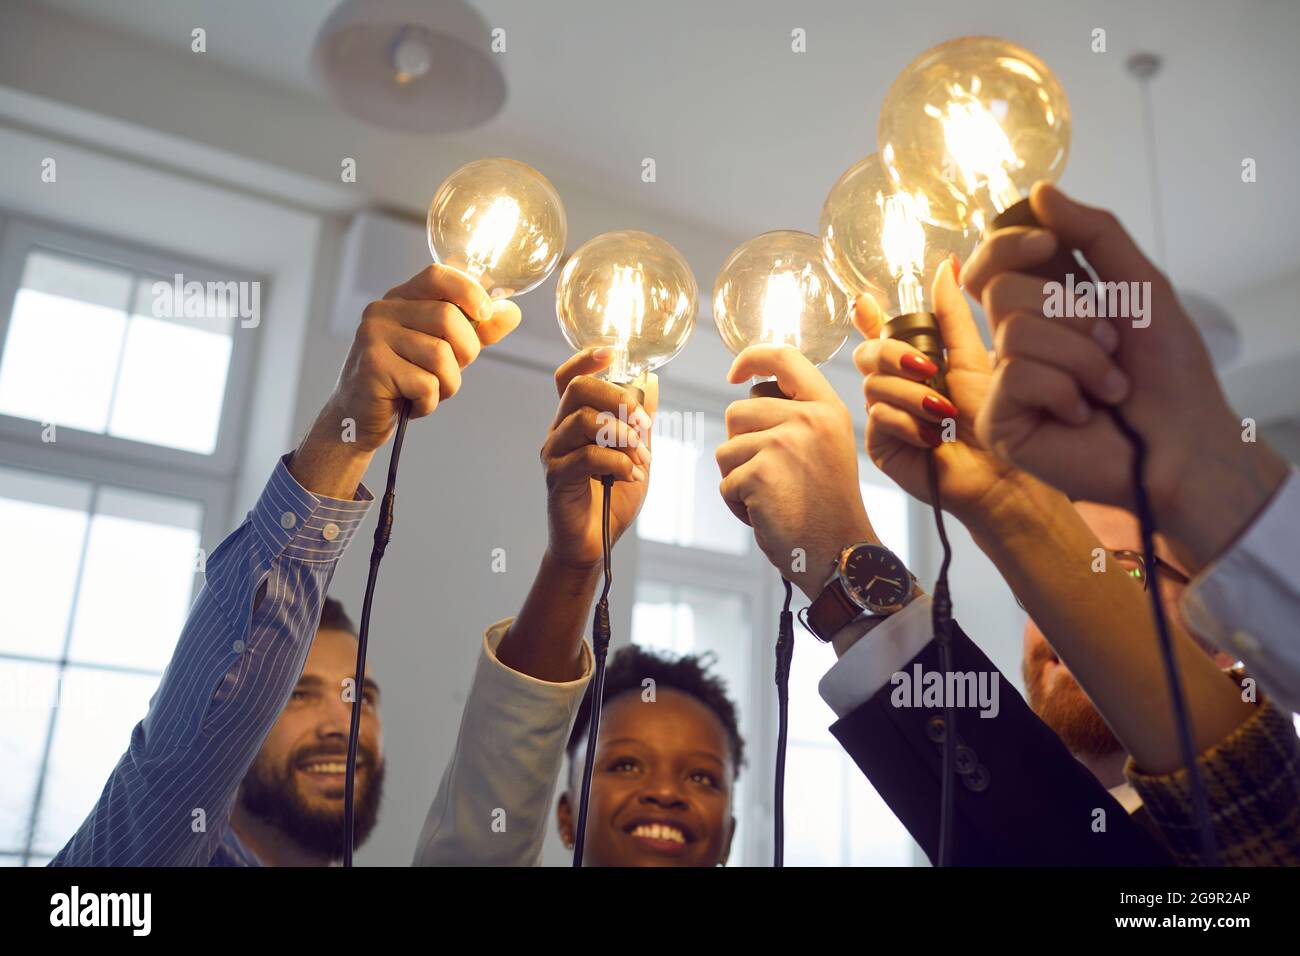 Interracial group of people standing together with raised lightbulb office shot Stock Photo